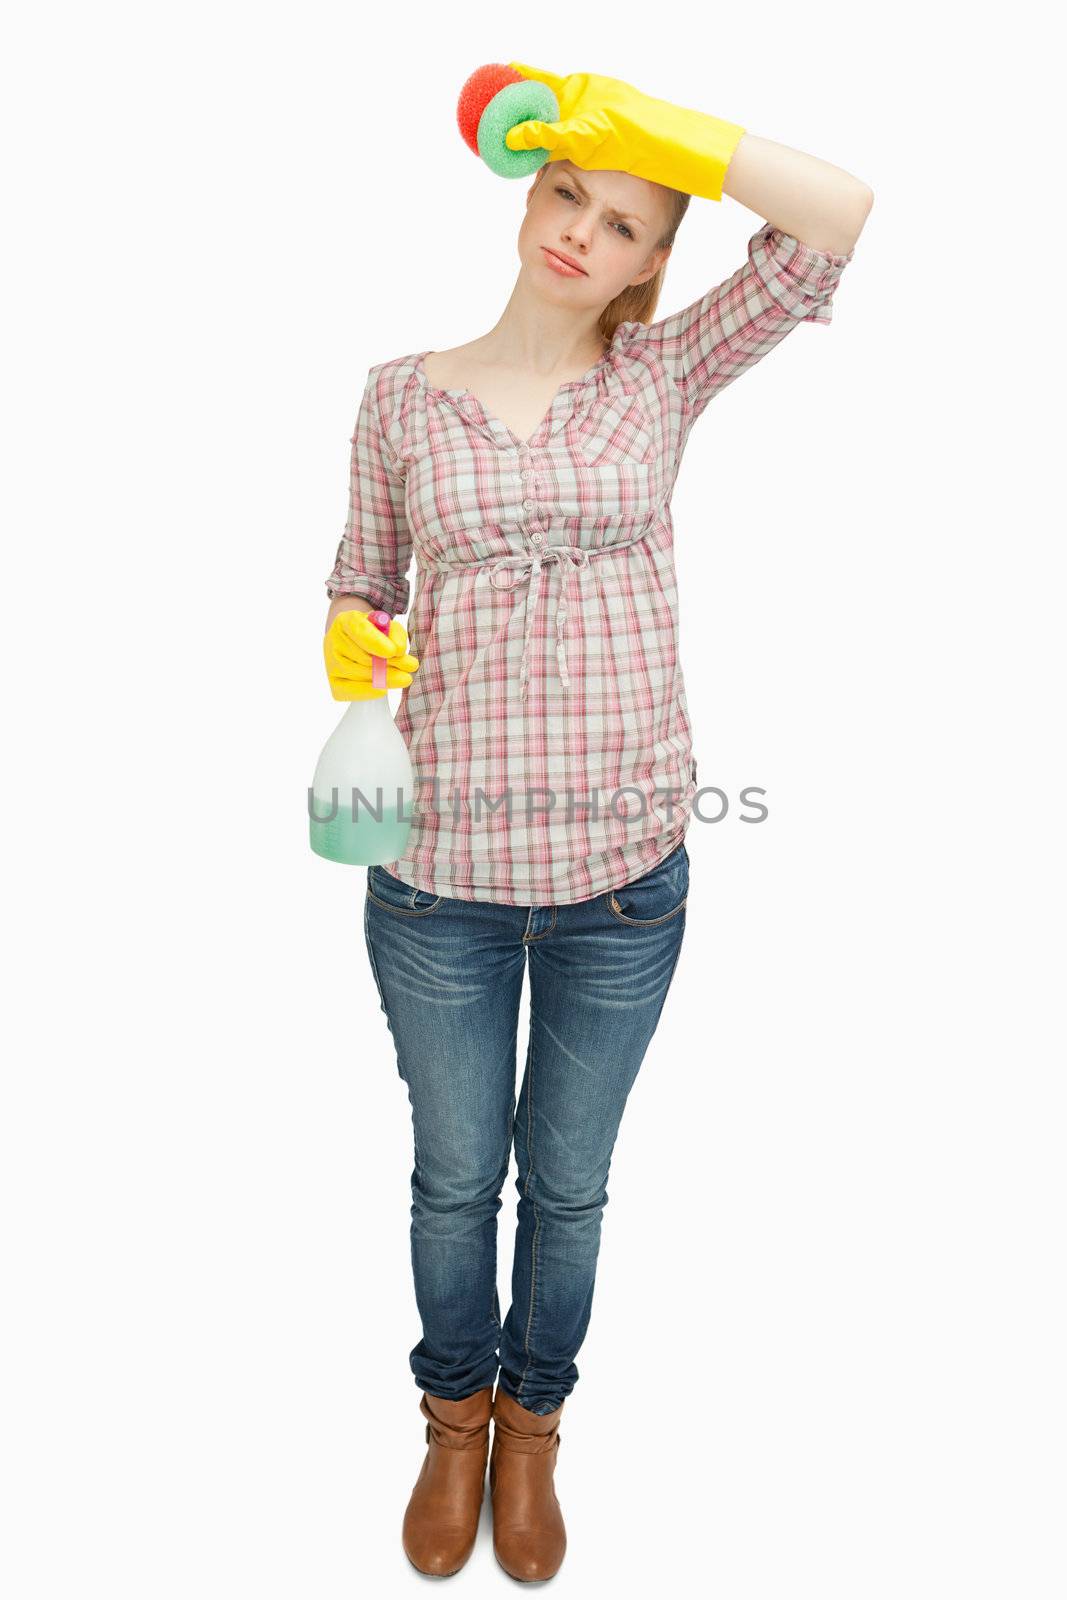 Woman wiping her forehead while holding a spray bottle  against white background